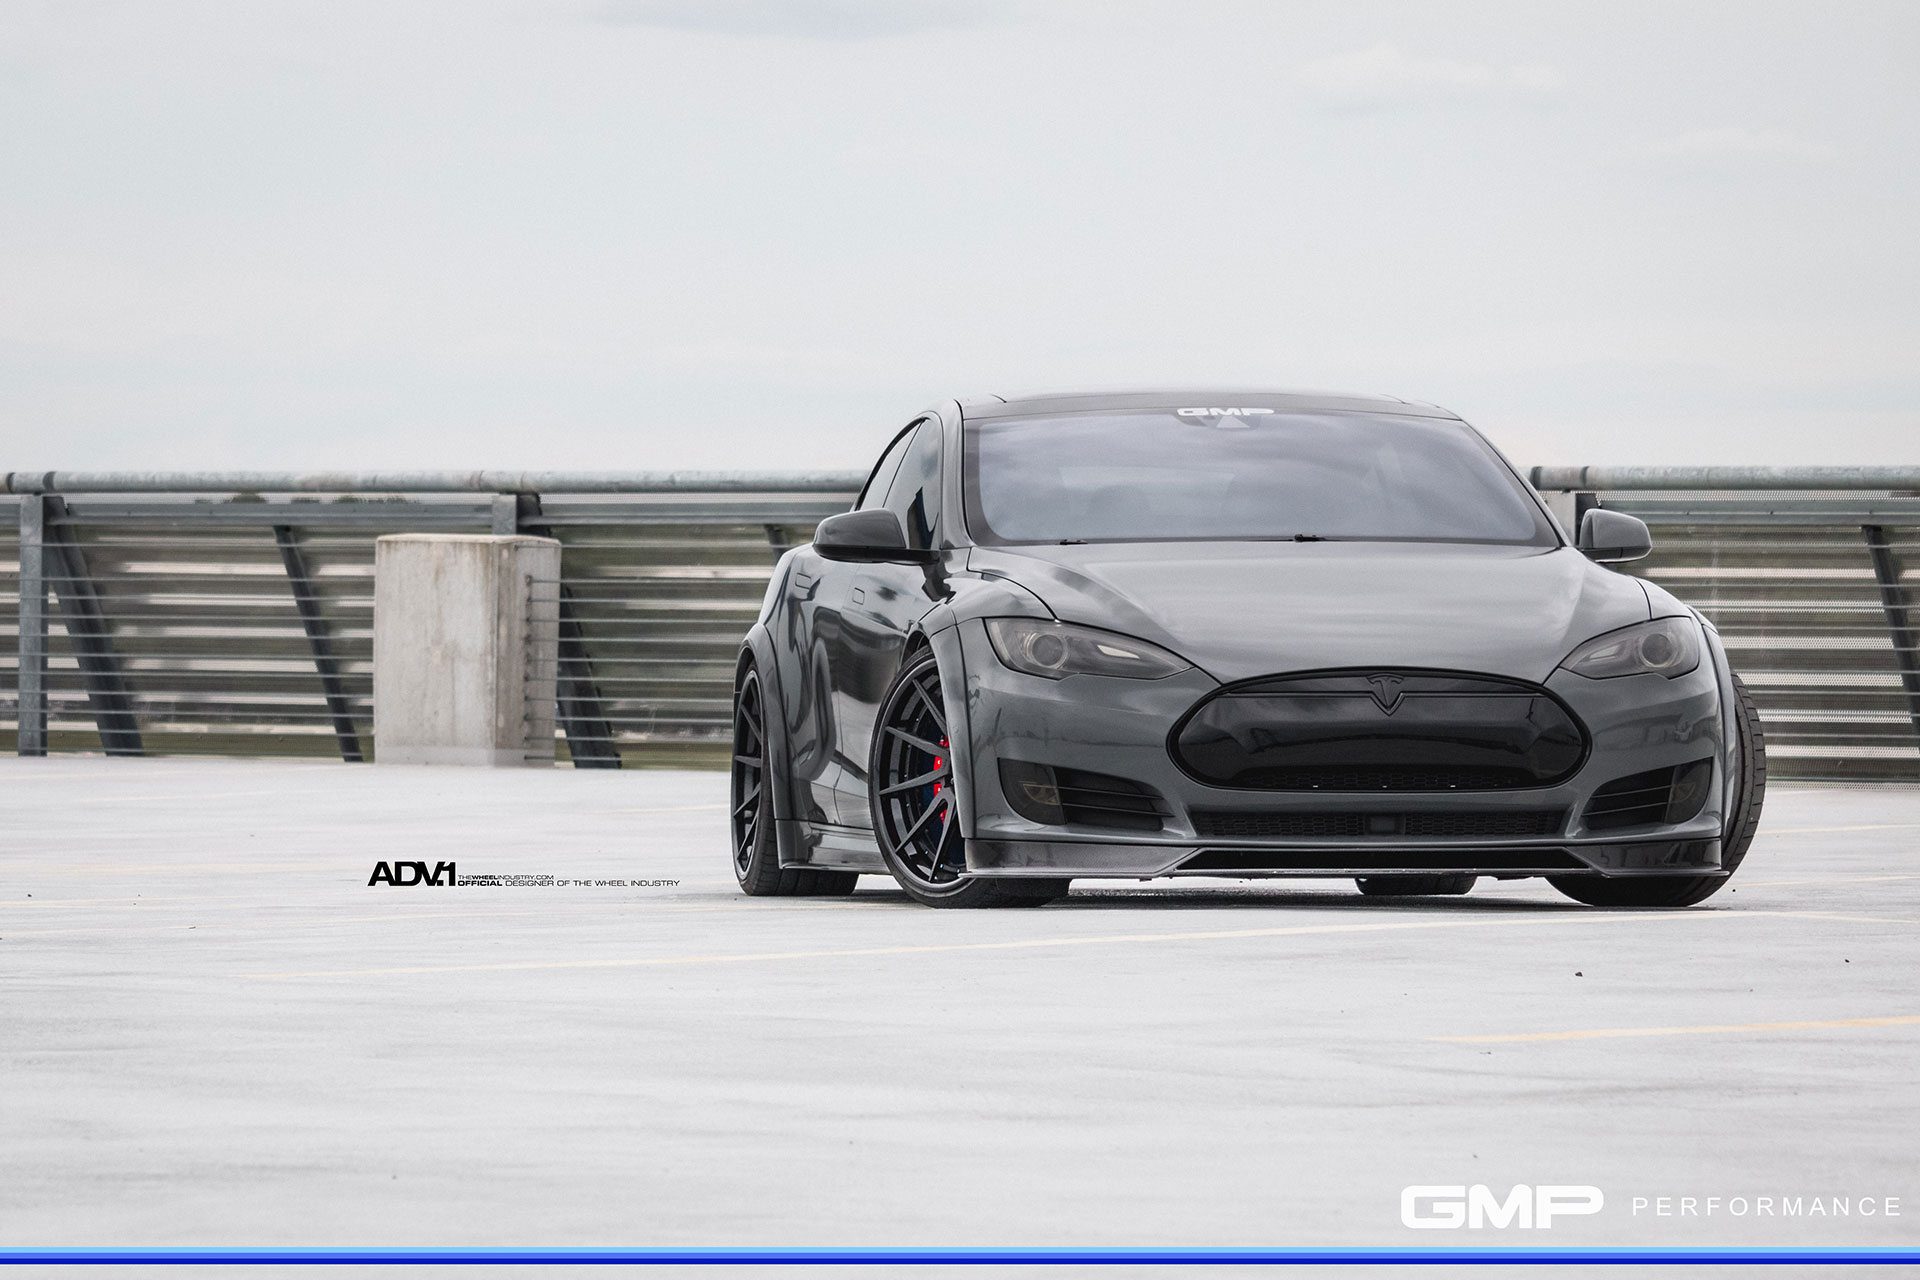 Tesla Model S Looking Aggressive Thanks To Some ADV.1 Wheels